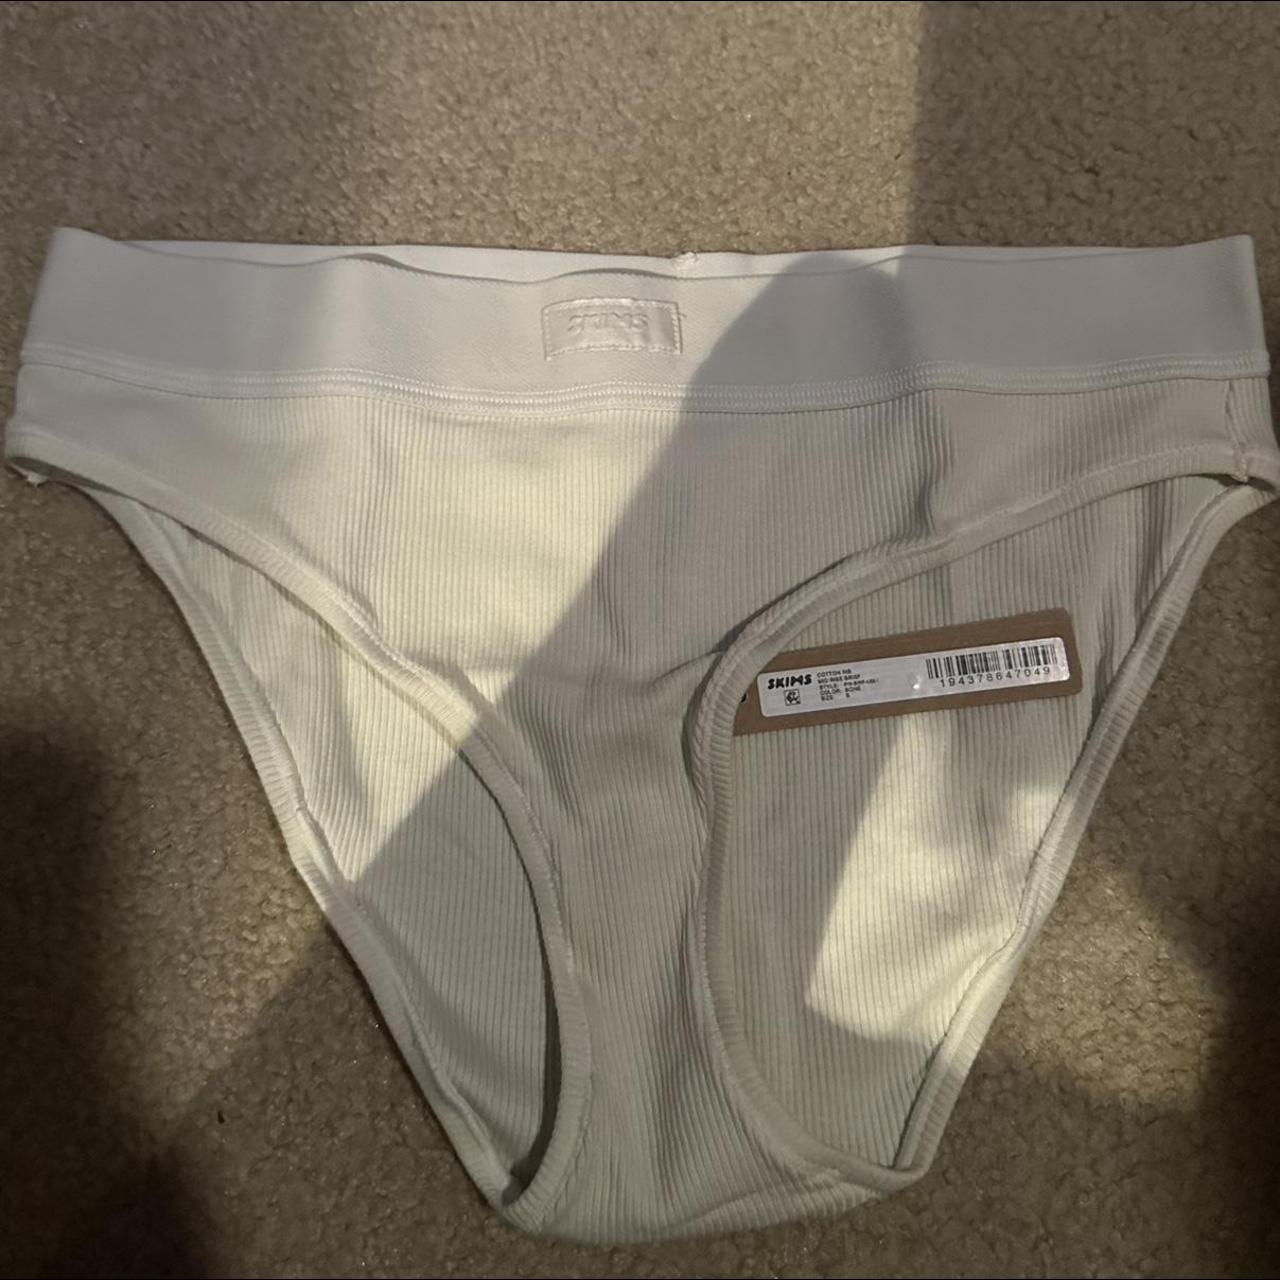 Skims cotton rib brief. Brand new with tag! Even - Depop